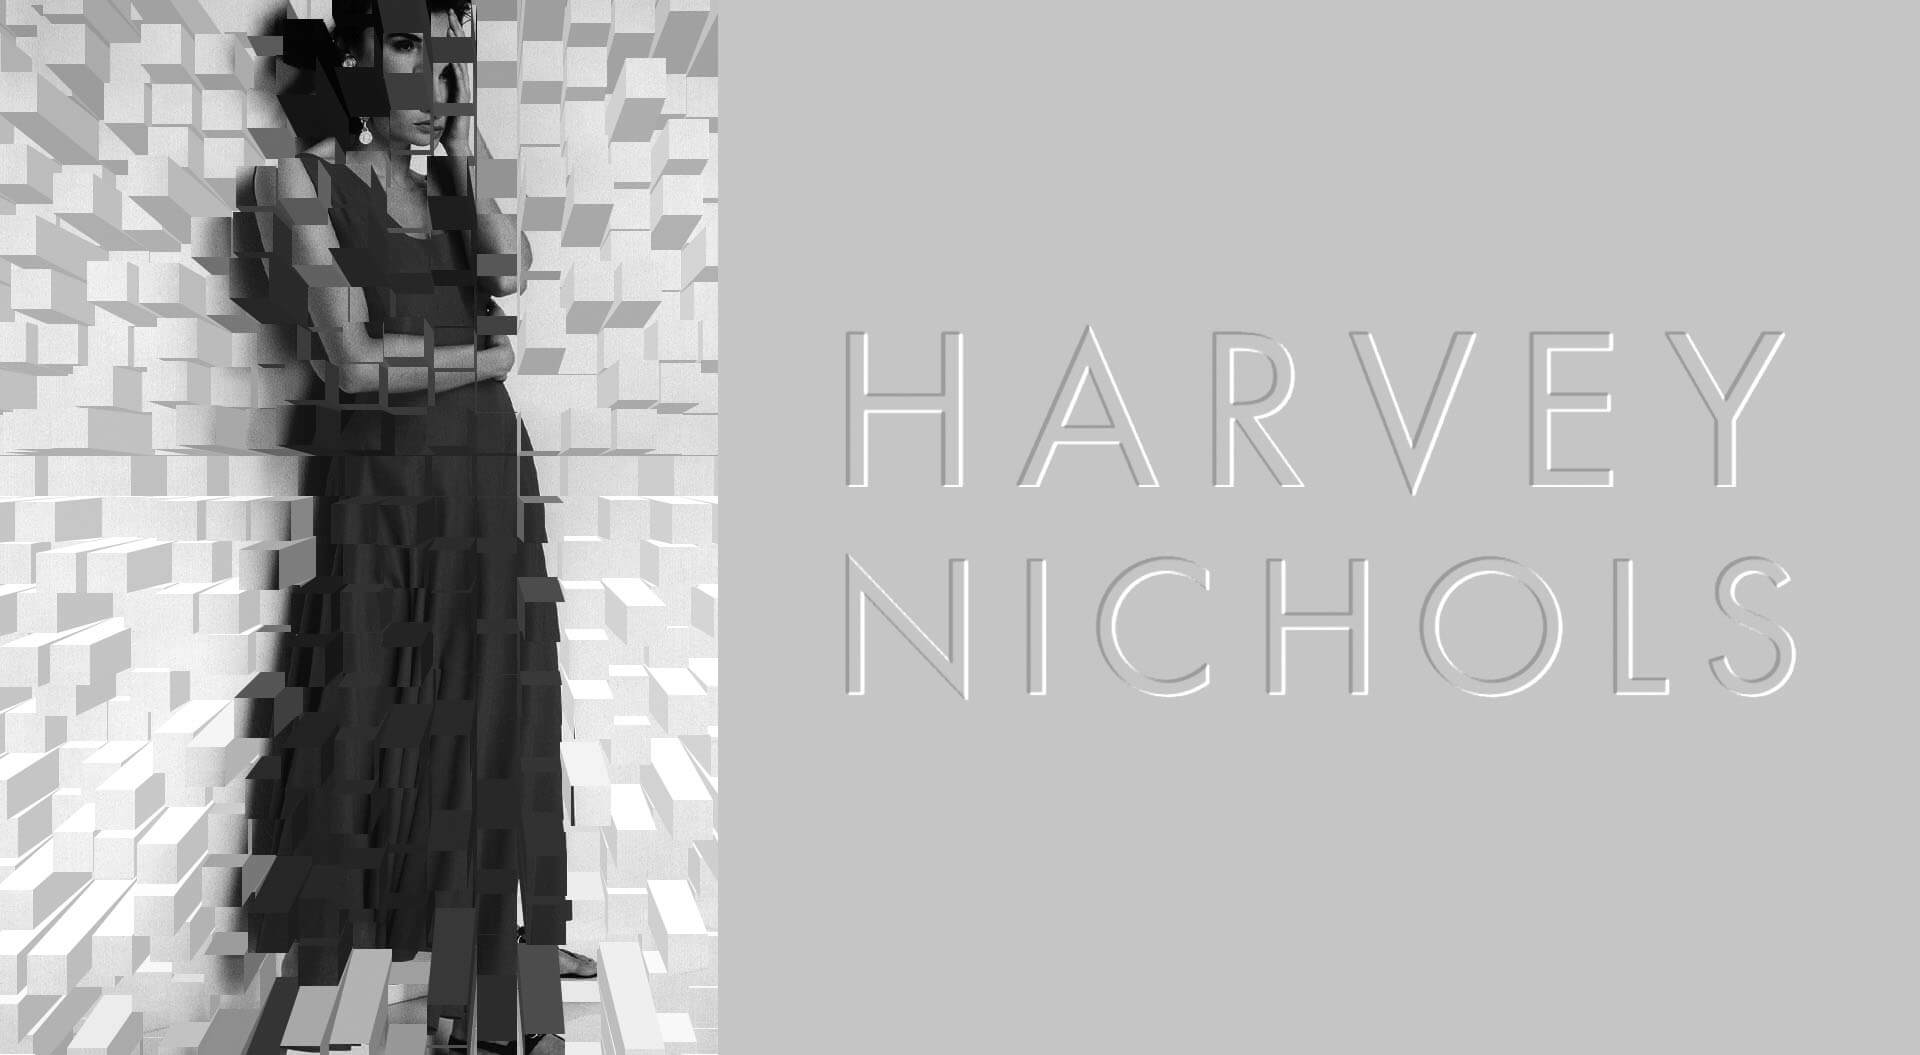 Fashion department store, best retail interior design, inspiring concepts in  fashion, rebrand, new trends, ideas, marketing strategy, format planning, shop layout, Harvey Nichols